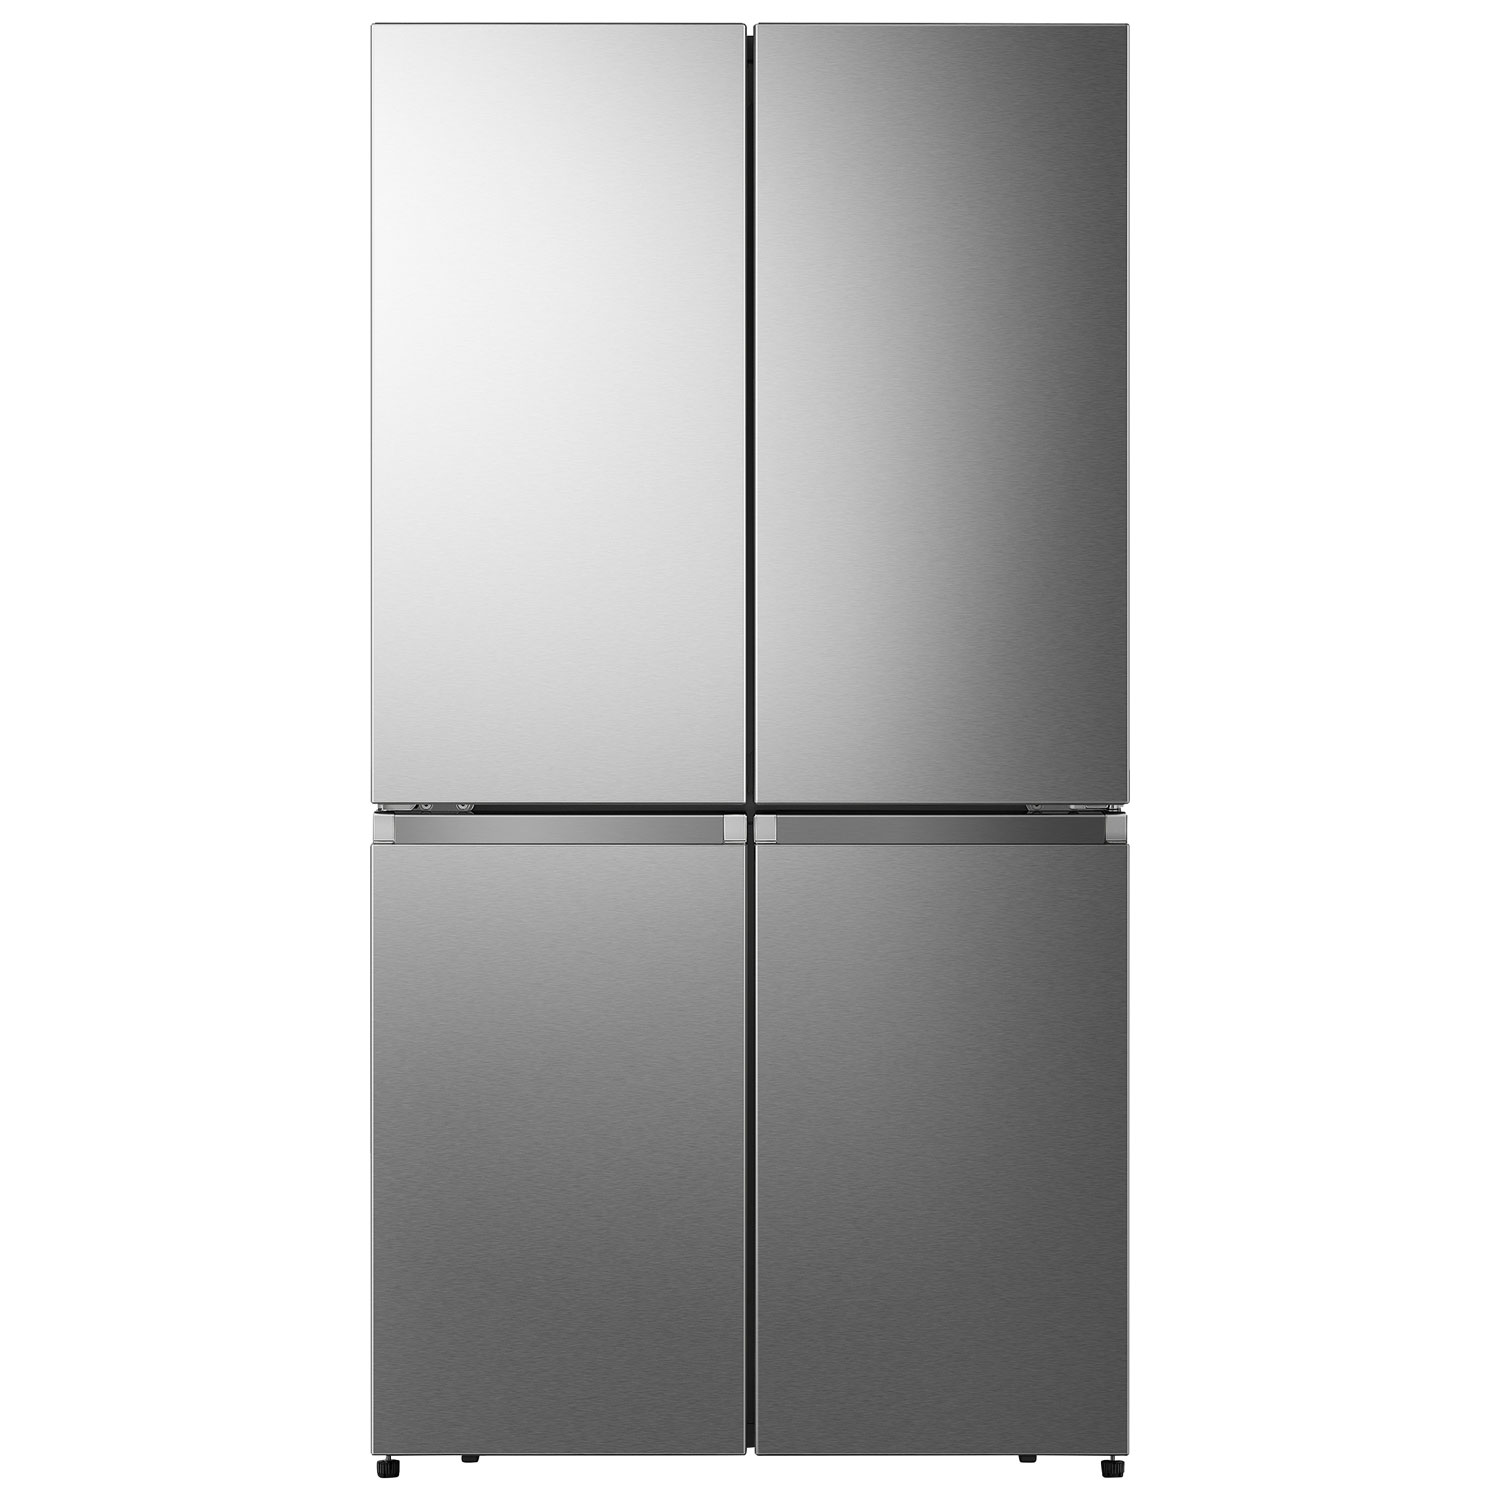 Hisense 36" 21.5 Cu. Ft. French Door Refrigerator with Ice Dispenser (RQ22N6ASD) - Stainless Steel